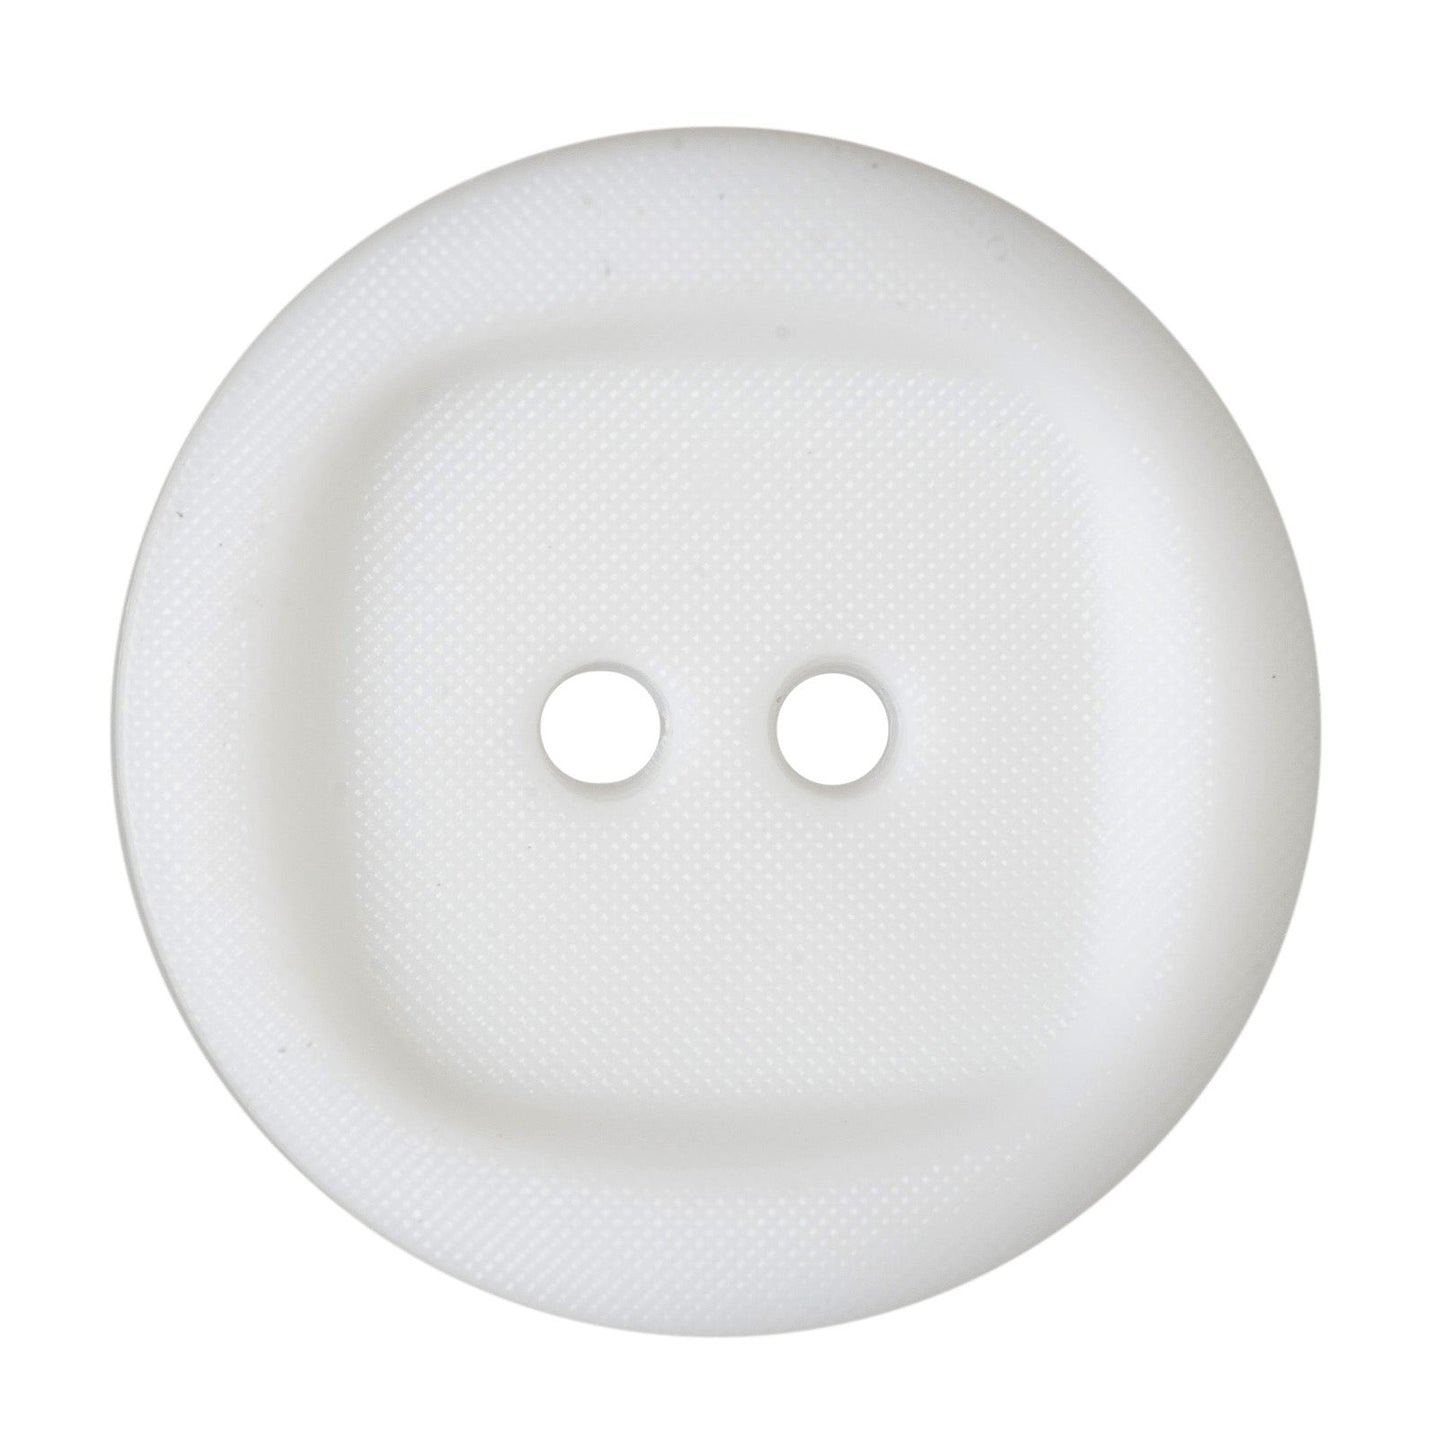 2 Hole Wavy with Square Insert Button - 28mm - White [LD4.2]